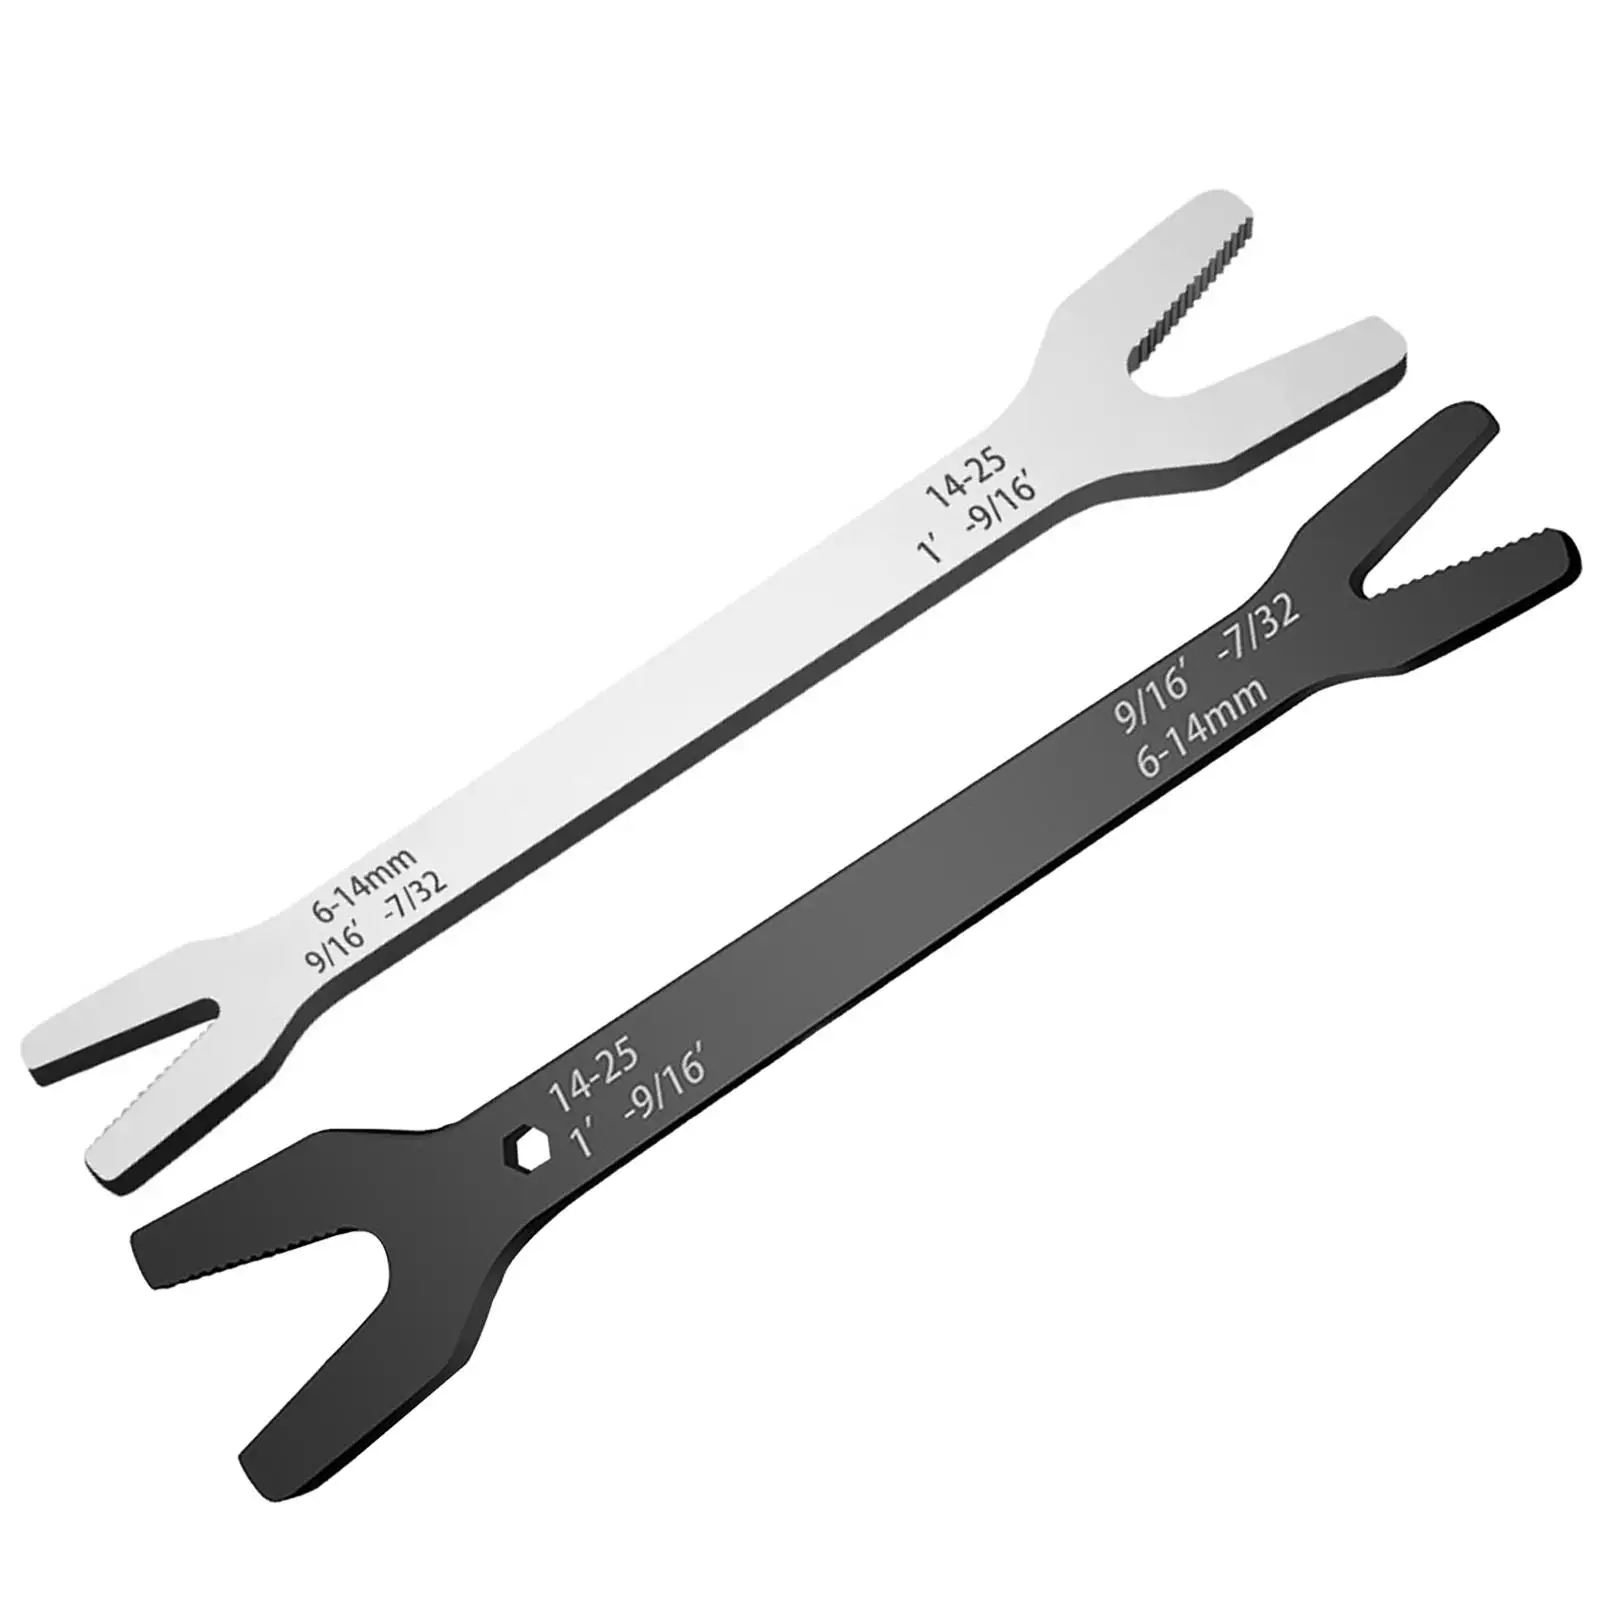 Universal Wrench 6mm to 25mm Hand Tools Long Handle Household X Shaped Double Open Ends for Car Bike Repairing Maintenance Tool